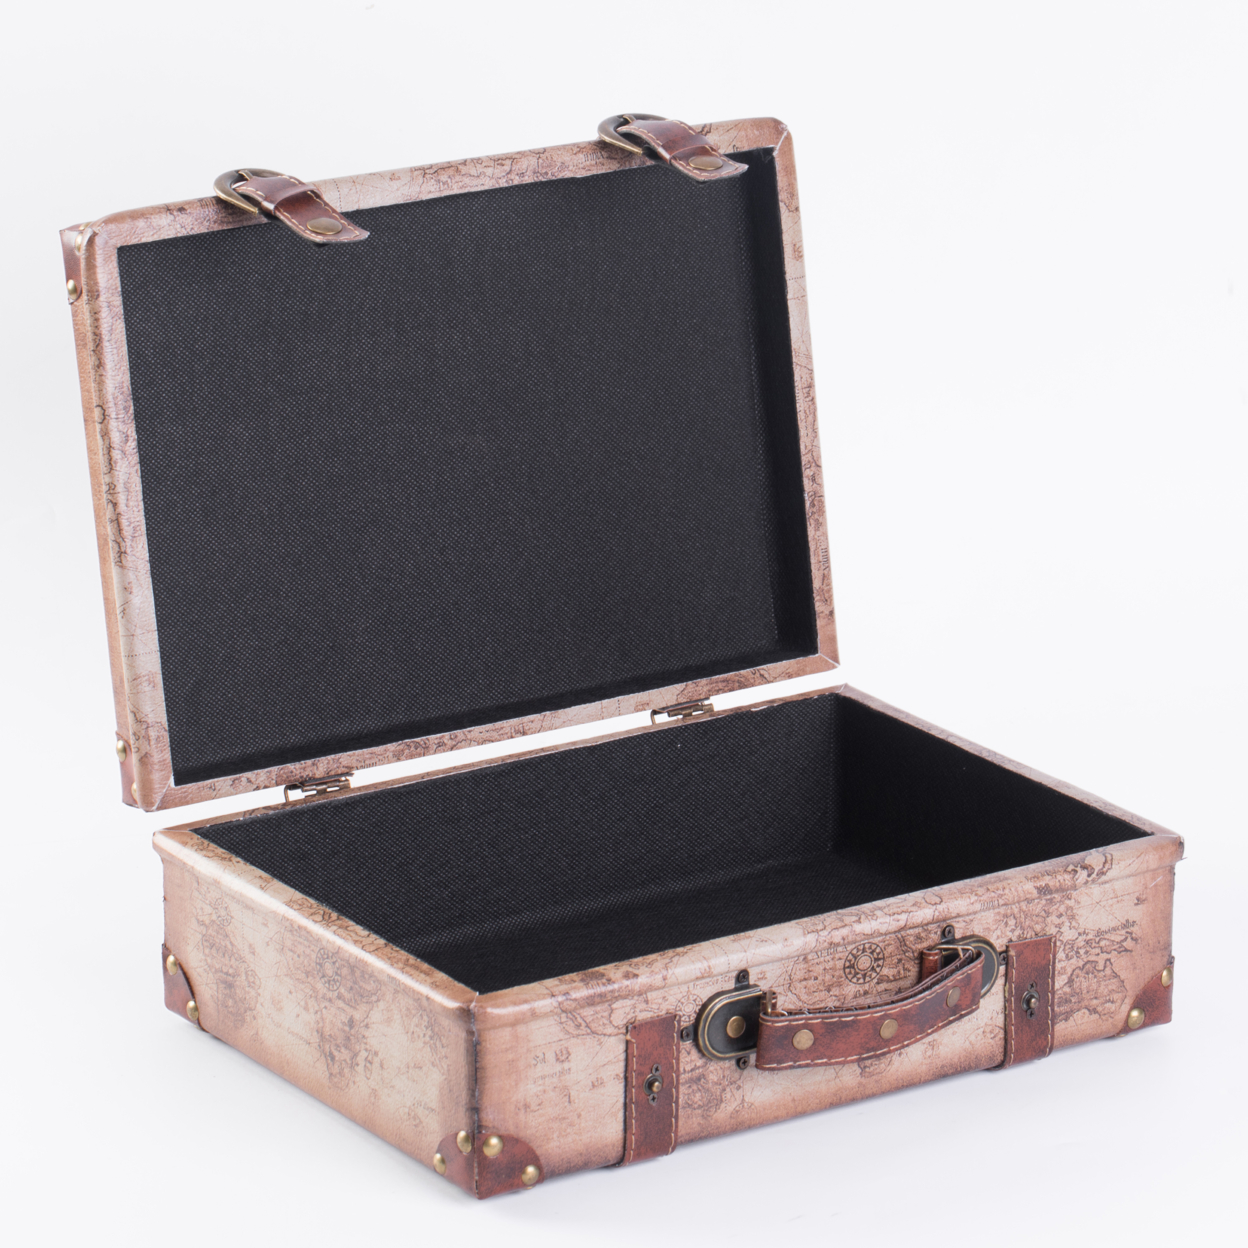 Set of 2 Vintage-Style World Map Leather Suitcase Trunks with Straps and Handle - image 4 of 6